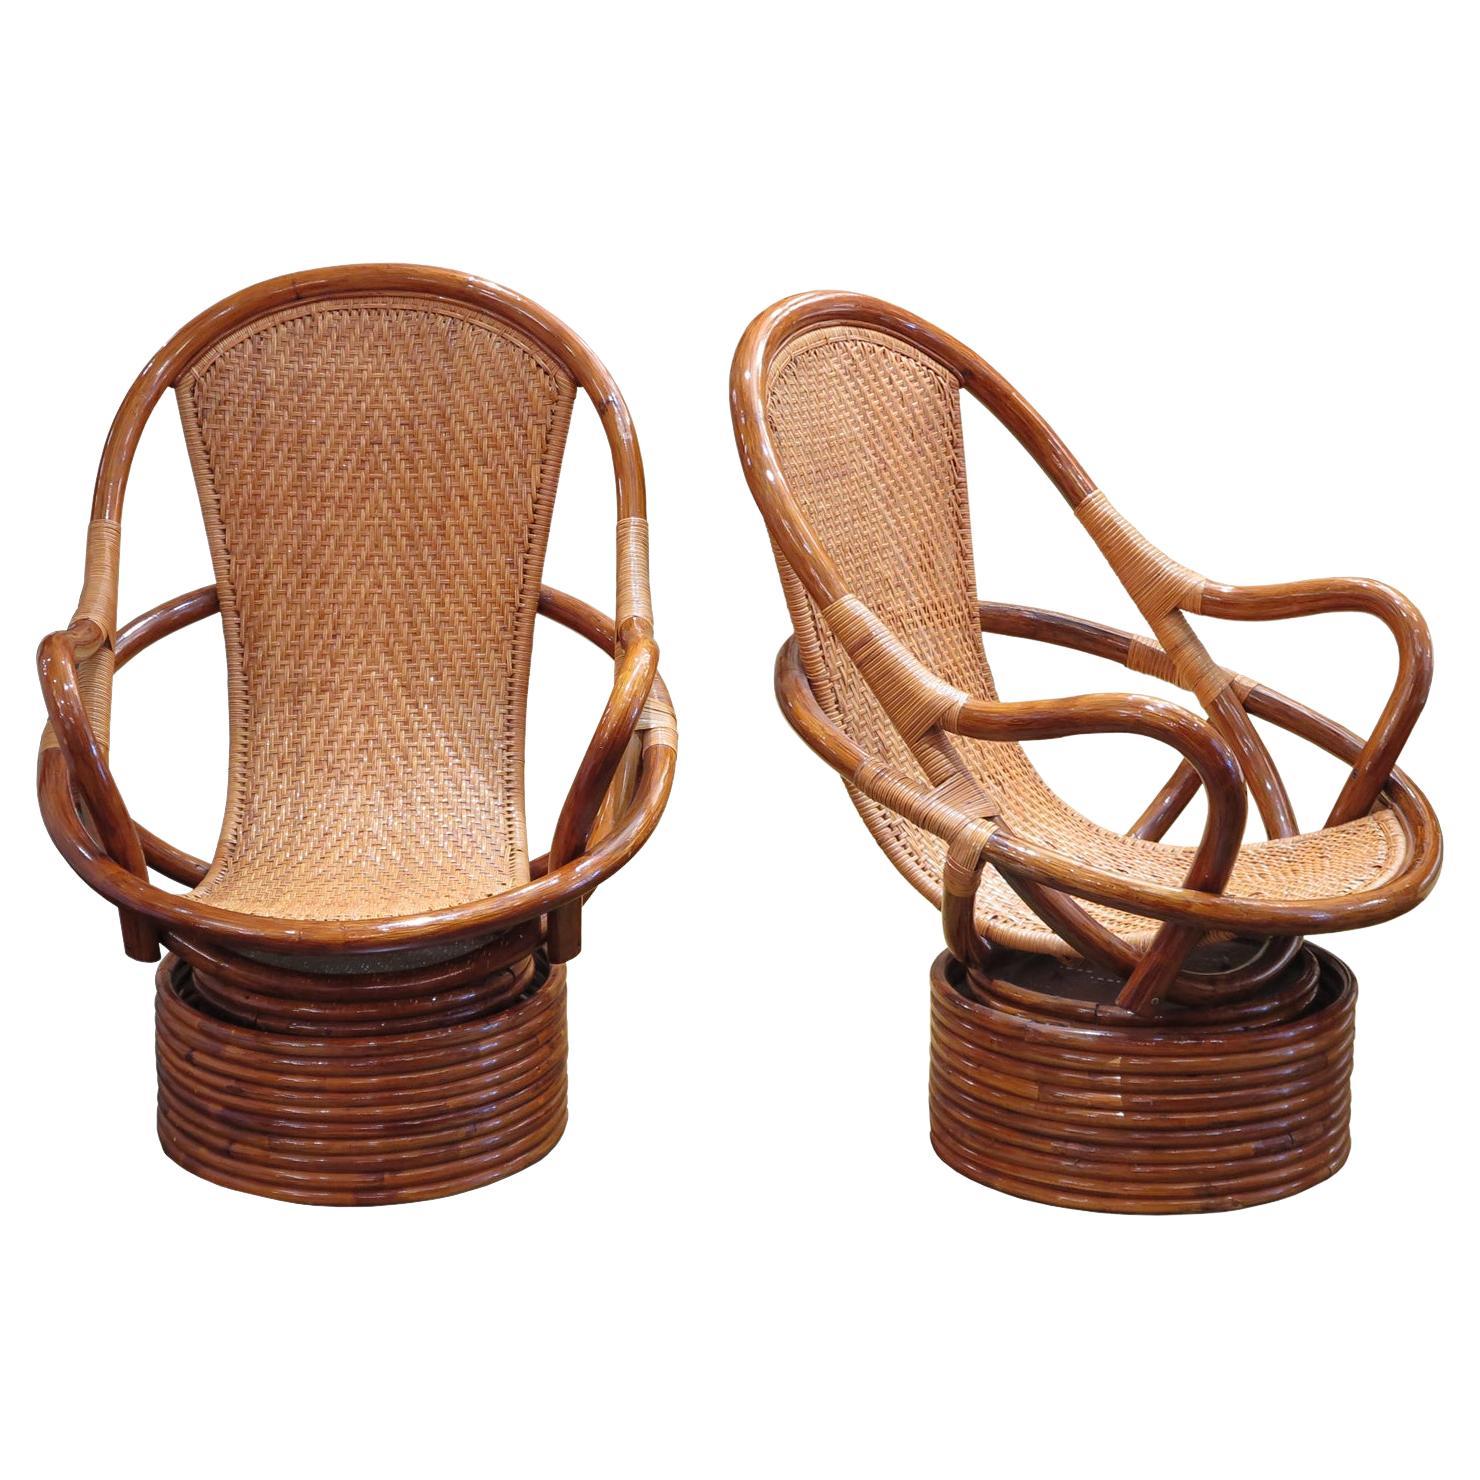 Pair of Lounge Chairs in Ratan Seat with Swivel Base, USA Late 20th Century For Sale